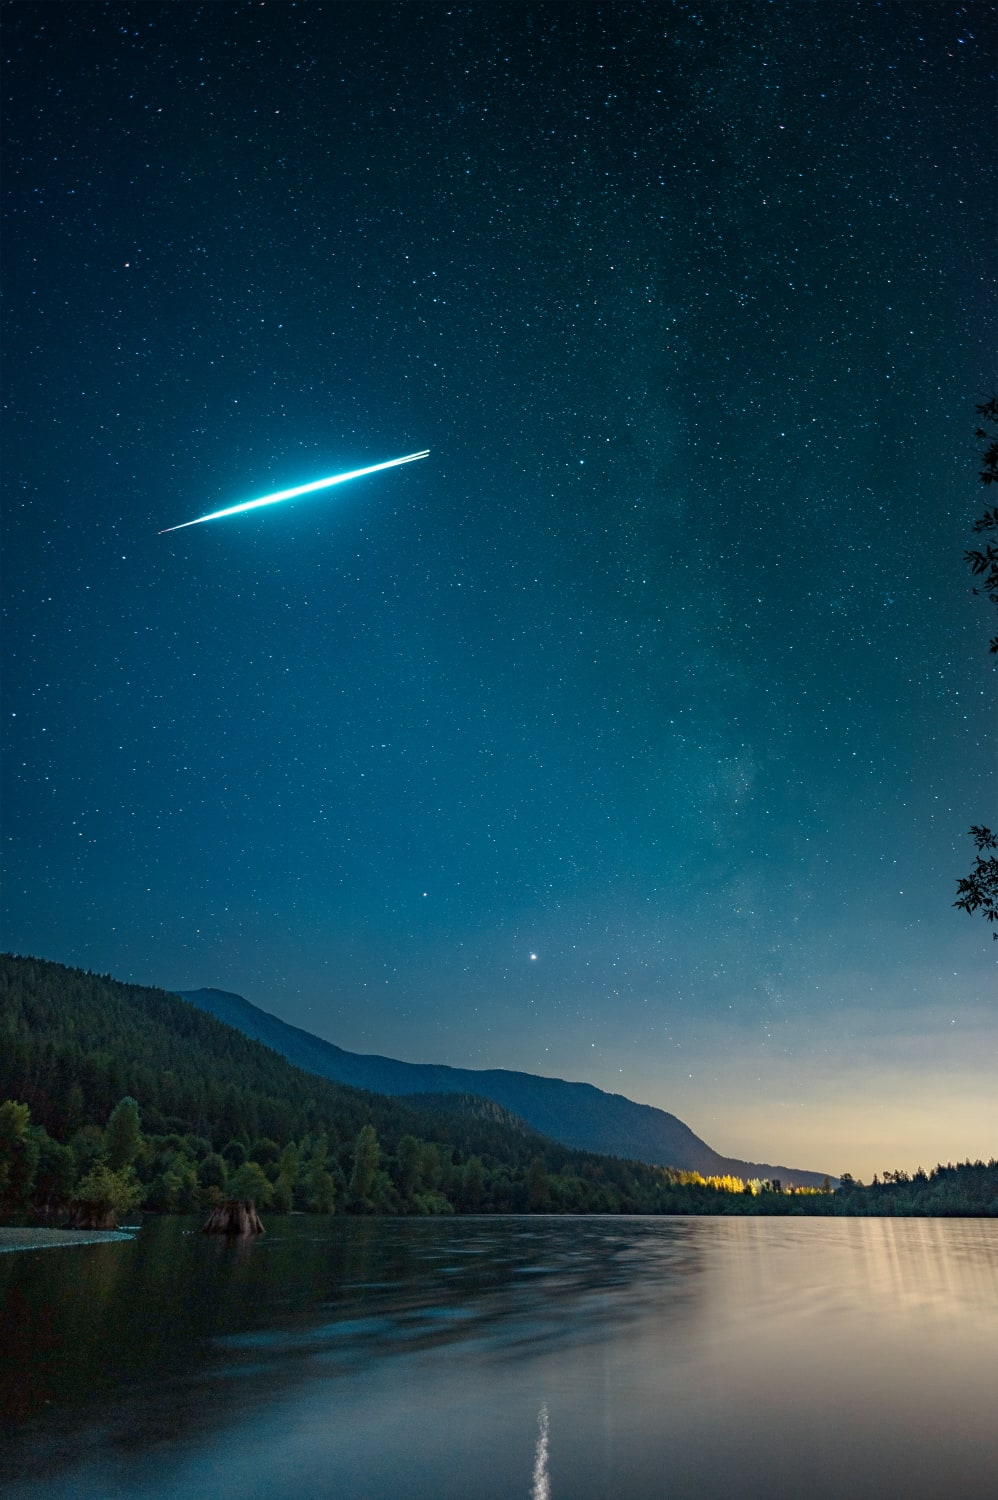 Went to Rattlesnake Lake, WA to see the milky way, caught an exploding meteor from the Perseids shower